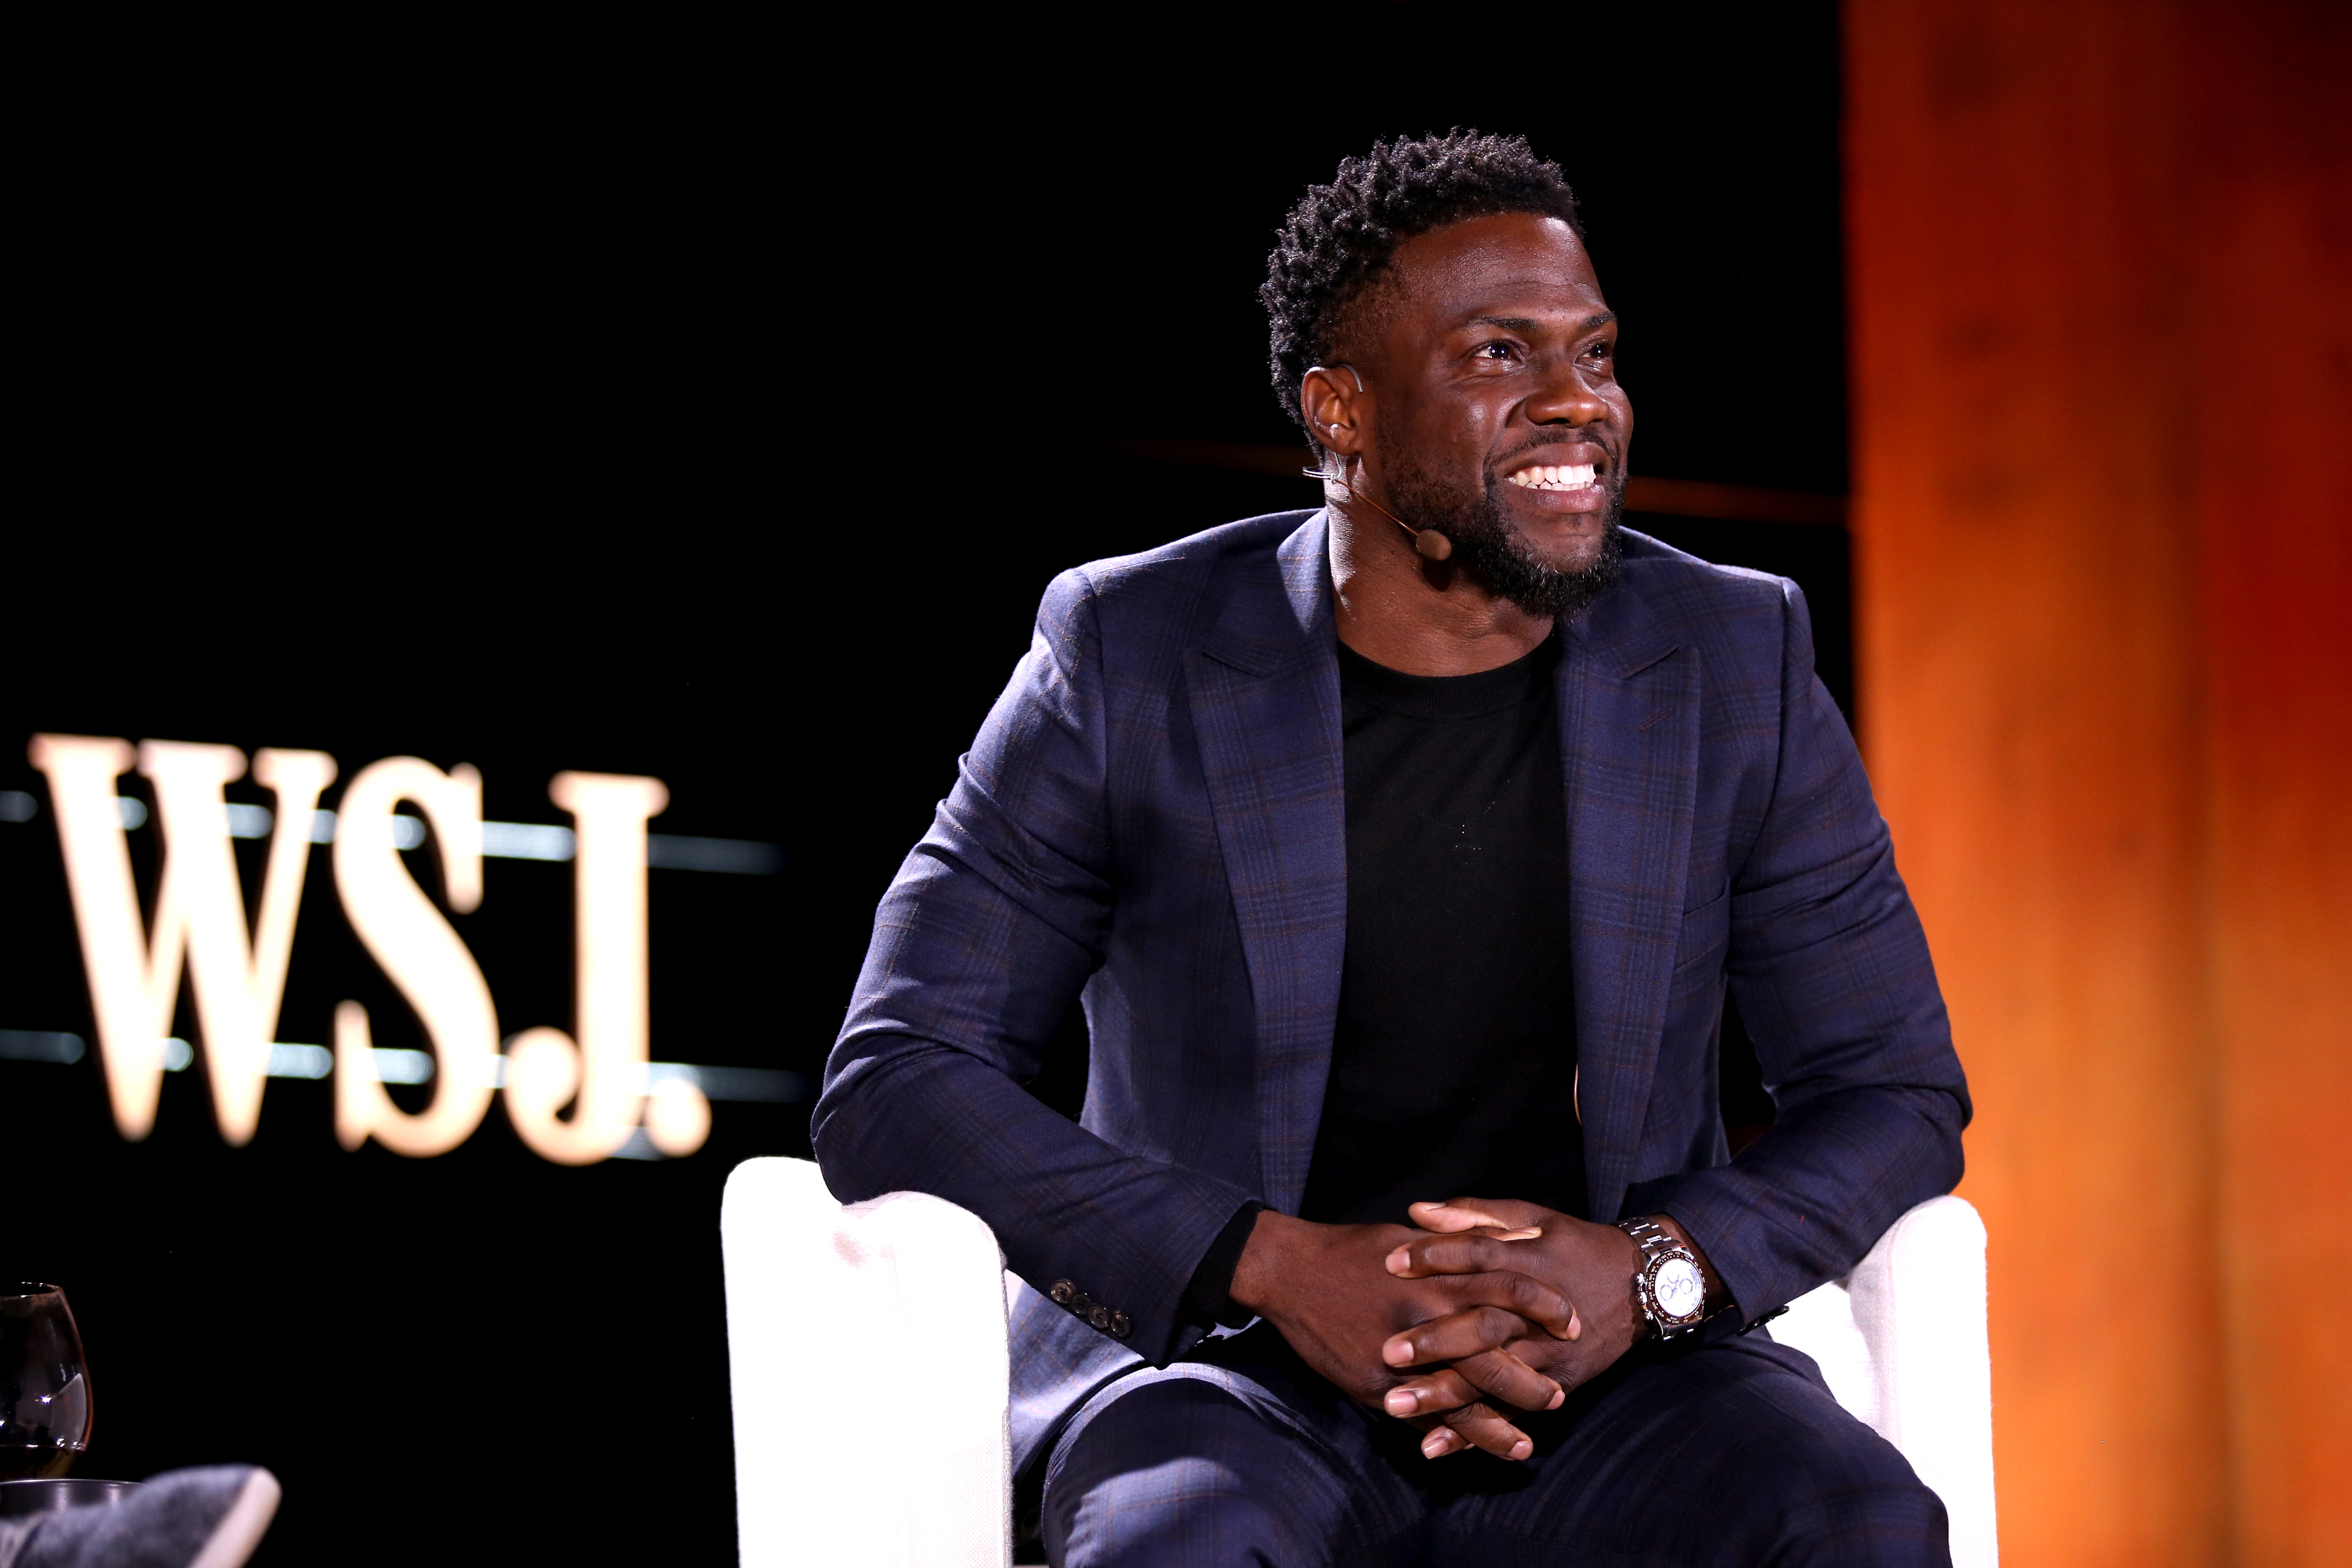 Kevin Hart Gifts His Boys With Classic Cars To Celebrate End Of “Irresponsible Tour”